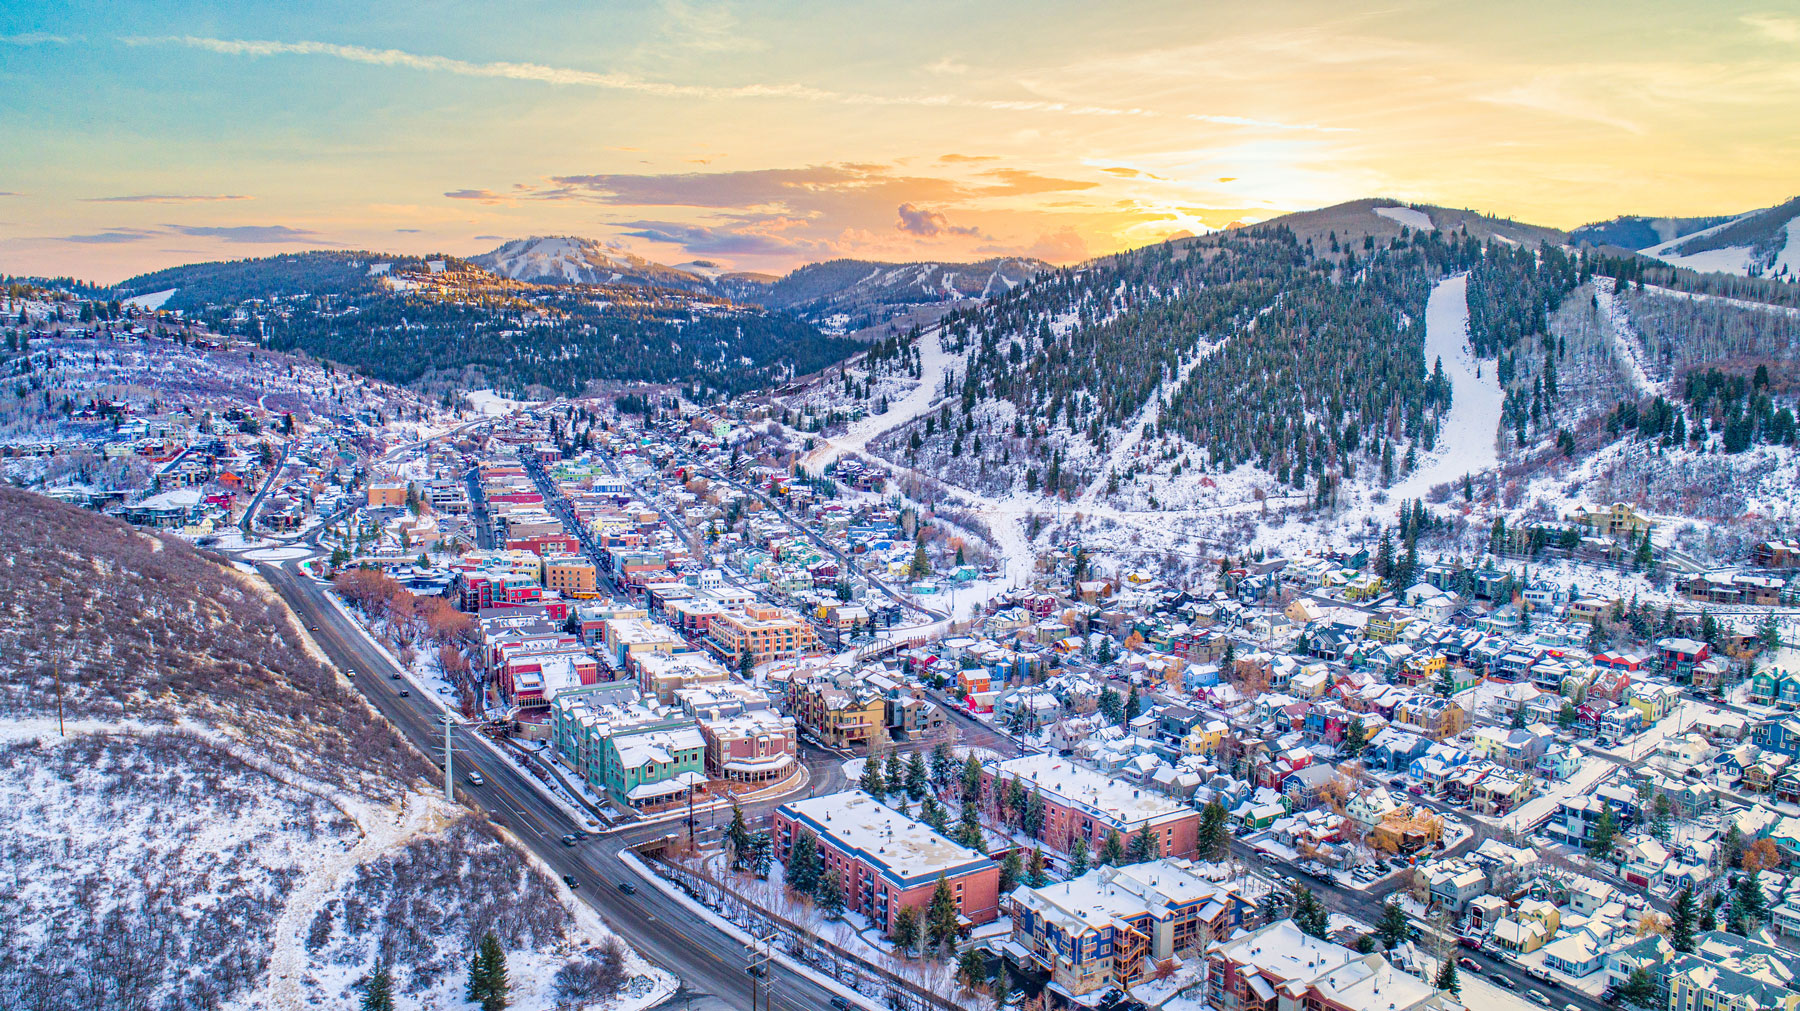 Mountain Magic: How Our Coffee Shop Captures the Essence of Park City